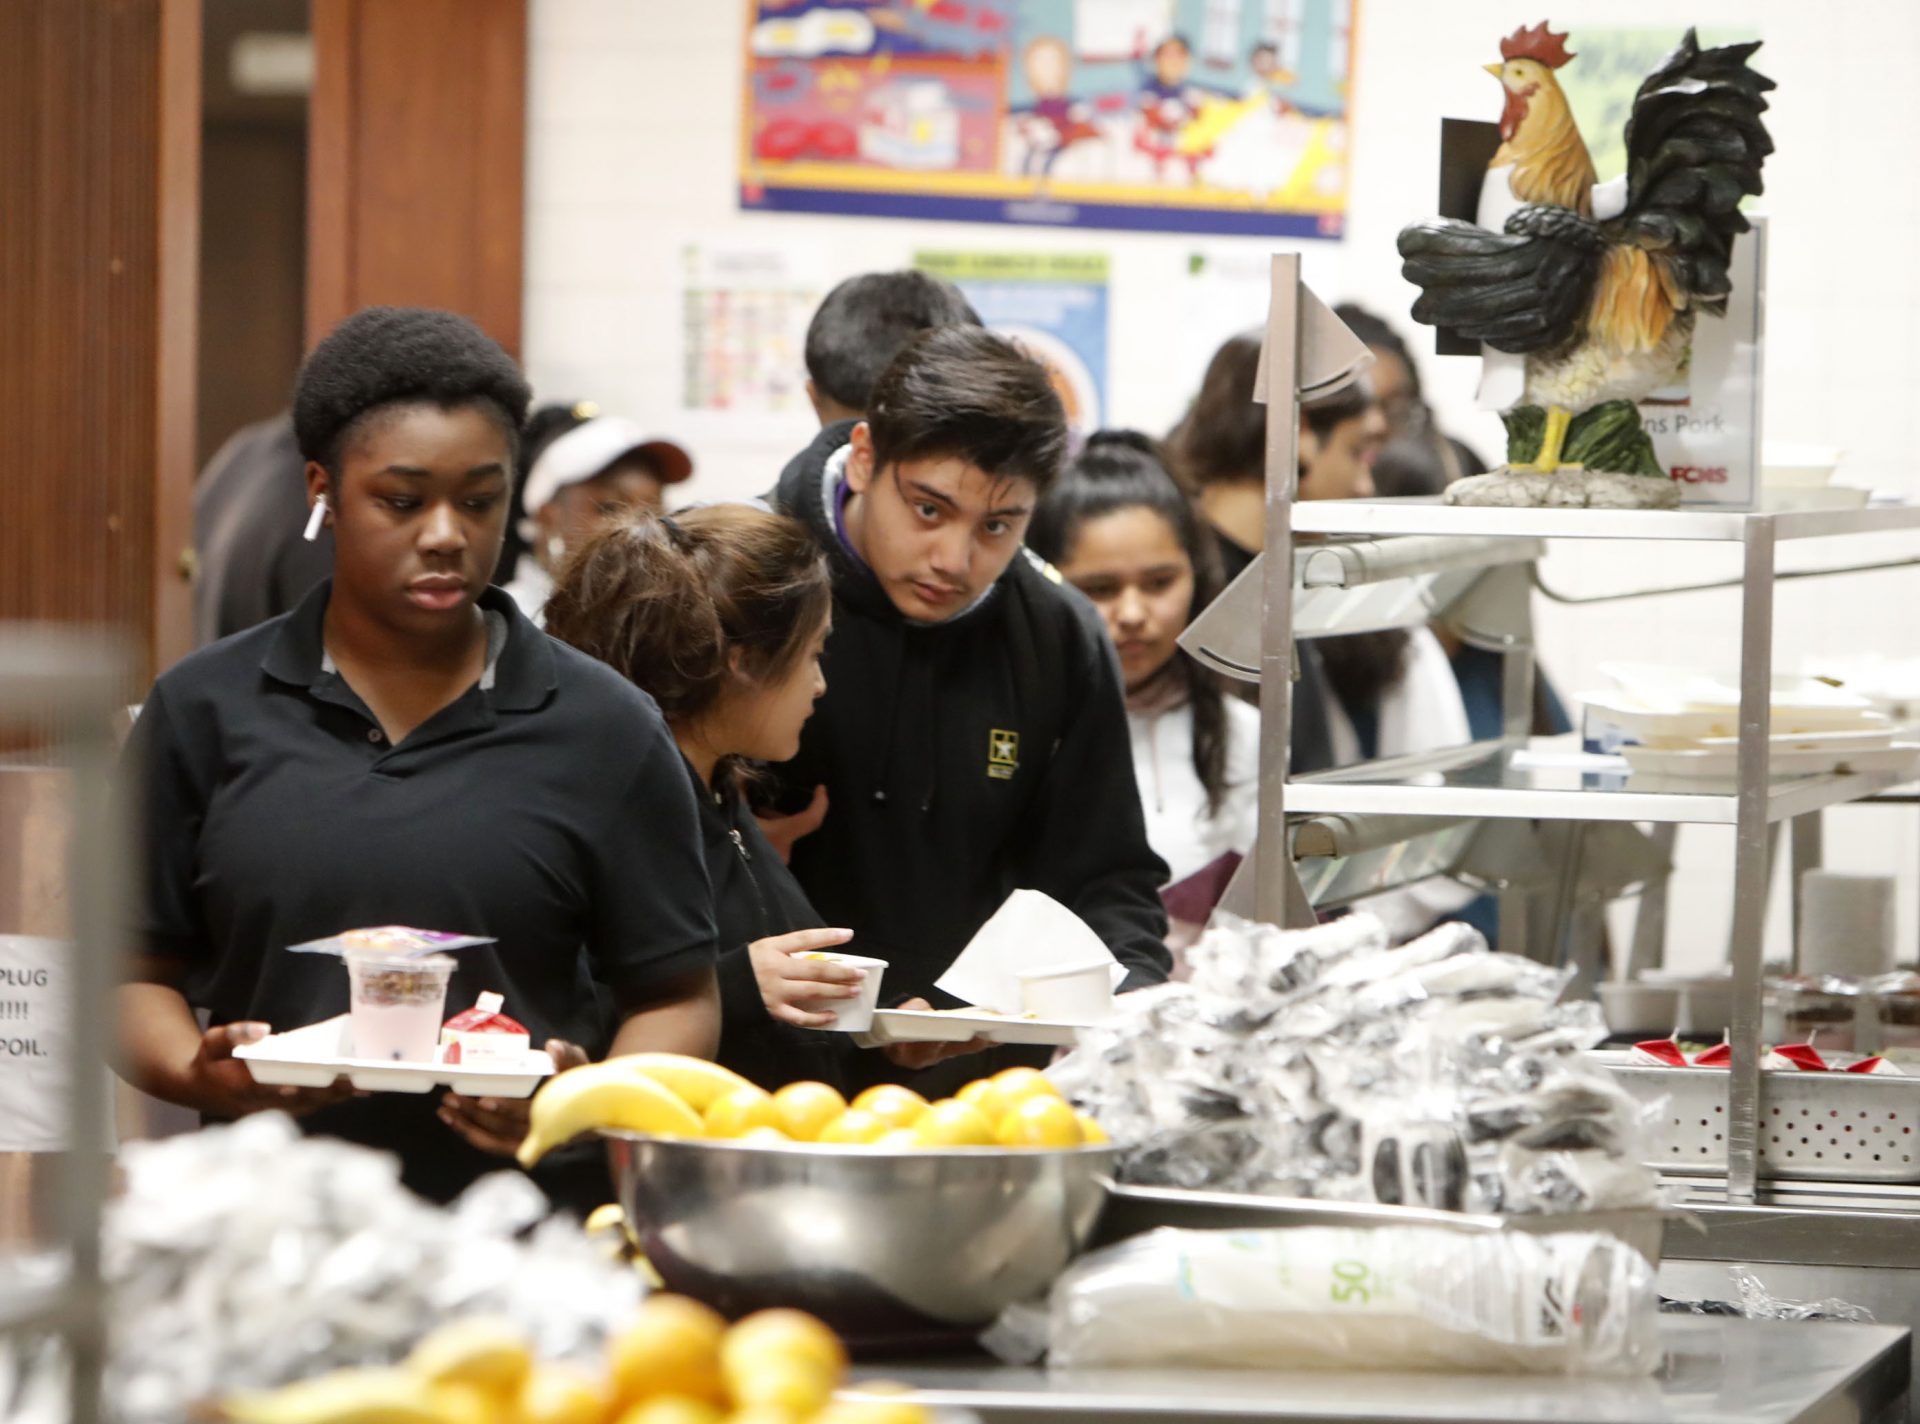 Students line up for lunch in the cafeteria at Lincoln High School in Dallas, Friday, March 13, 2020. During the coming extended spring break school closures, this cafeteria and others in the Dallas Independent School District will be providing lunches to students despite the closure of the school.